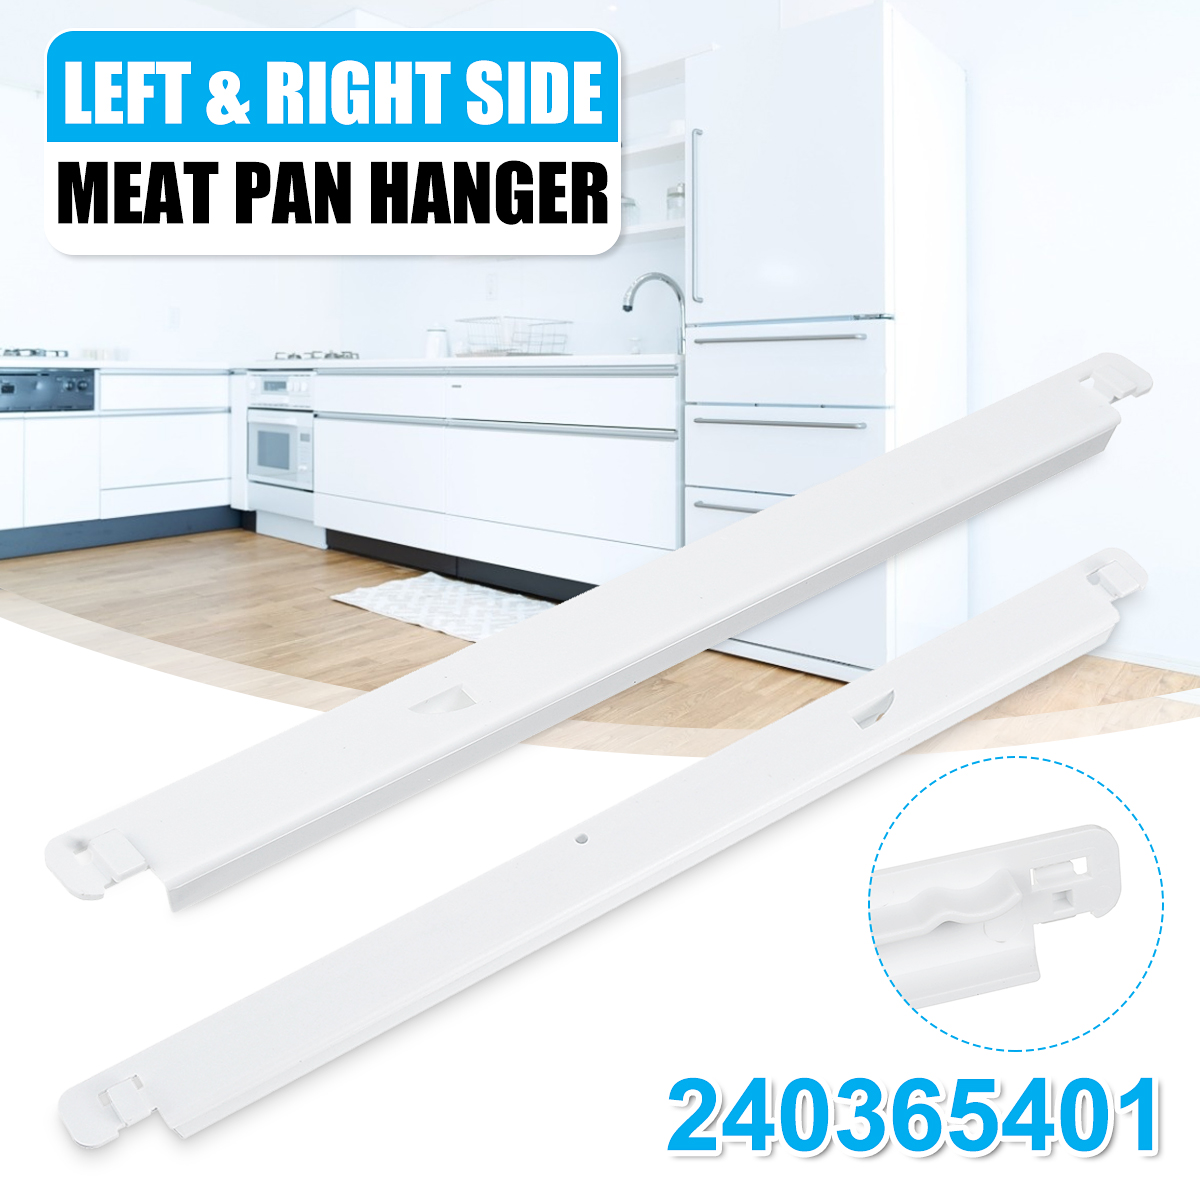 Left-Side-Meat-Pan-Hanger-Compatible-Track-BBQ-Grill-Pan-Hanger-for-Frigidaire-1632682